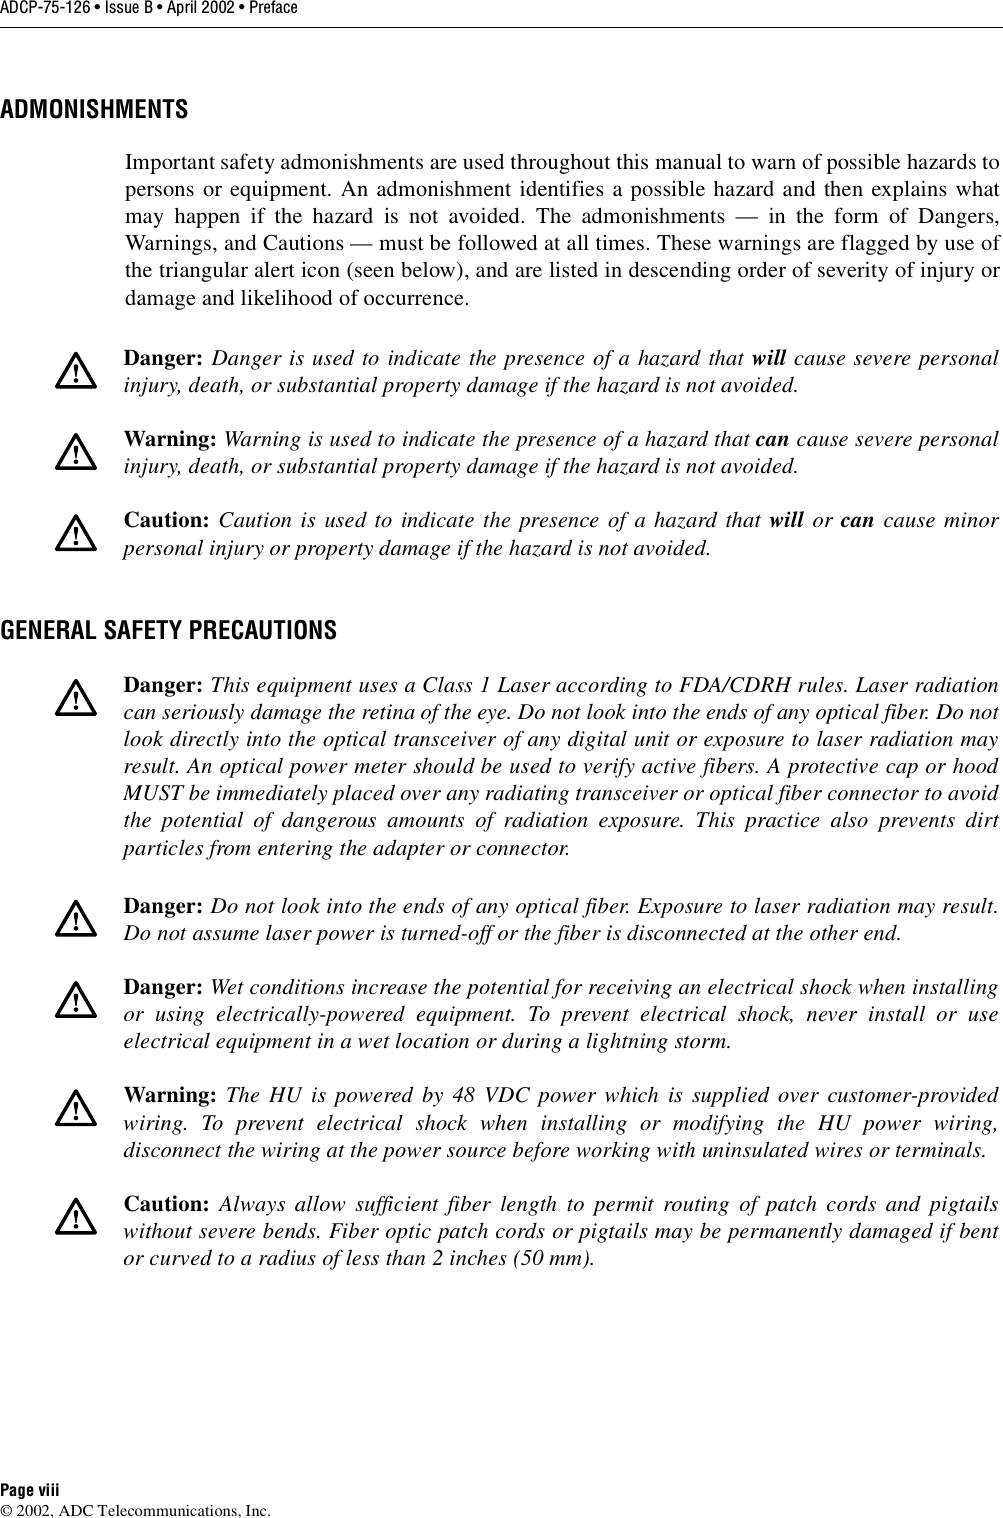 ADCP-75-126 • Issue B • April 2002 • PrefacePage viii©2002, ADC Telecommunications, Inc.ADMONISHMENTSImportant safety admonishments are used throughout this manual to warn of possible hazards topersons or equipment. An admonishment identifies apossible hazard and then explains whatmay happen if the hazard is not avoided. The admonishments —in the form of Dangers,Warnings, and Cautions —must be followed at all times. These warnings are flagged by use ofthe triangular alert icon (seen below), and are listed in descending order of severity of injury ordamage and likelihood of occurrence.GENERAL SAFETY PRECAUTIONSDanger: Danger is used to indicate the presence of ahazard that will cause severe personalinjury, death, or substantial property damage if the hazard is not avoided.Warning: Warning is used to indicate the presence of ahazard that can cause severe personalinjury, death, or substantial property damage if the hazard is not avoided.Caution: Caution is used to indicate the presence of ahazard that will or can cause minorpersonal injury or property damage if the hazard is not avoided.Danger: This equipment uses aClass 1Laser according to FDA/CDRH rules. Laser radiationcan seriously damage the retina of the eye. Do not look into the ends of any optical fiber. Do notlook directly into the optical transceiver of any digital unit or exposure to laser radiation mayresult. An optical power meter should be used to verify active fibers. Aprotective cap or hoodMUST be immediately placed over any radiating transceiver or optical fiber connector to avoidthe potential of dangerous amounts of radiation exposure. This practice also prevents dirtparticles from entering the adapter or connector.Danger: Do not look into the ends of any optical fiber. Exposure to laser radiation may result.Do not assume laser power is turned-off or the fiber is disconnected at the other end.Danger: Wet conditions increase the potential for receiving an electrical shock when installingor using electrically-powered equipment. To prevent electrical shock, never install or useelectrical equipment in awet location or during alightning storm.Warning: The HU is powered by 48 VDC power which is supplied over customer-providedwiring. To prevent electrical shock when installing or modifying the HU power wiring,disconnect the wiring at the power source before working with uninsulated wires or terminals.Caution: Always allow sufficient fiber length to permit routing of patch cords and pigtailswithout severe bends. Fiber optic patch cords or pigtails may be permanently damaged if bentor curved to aradius of less than 2inches (50 mm).